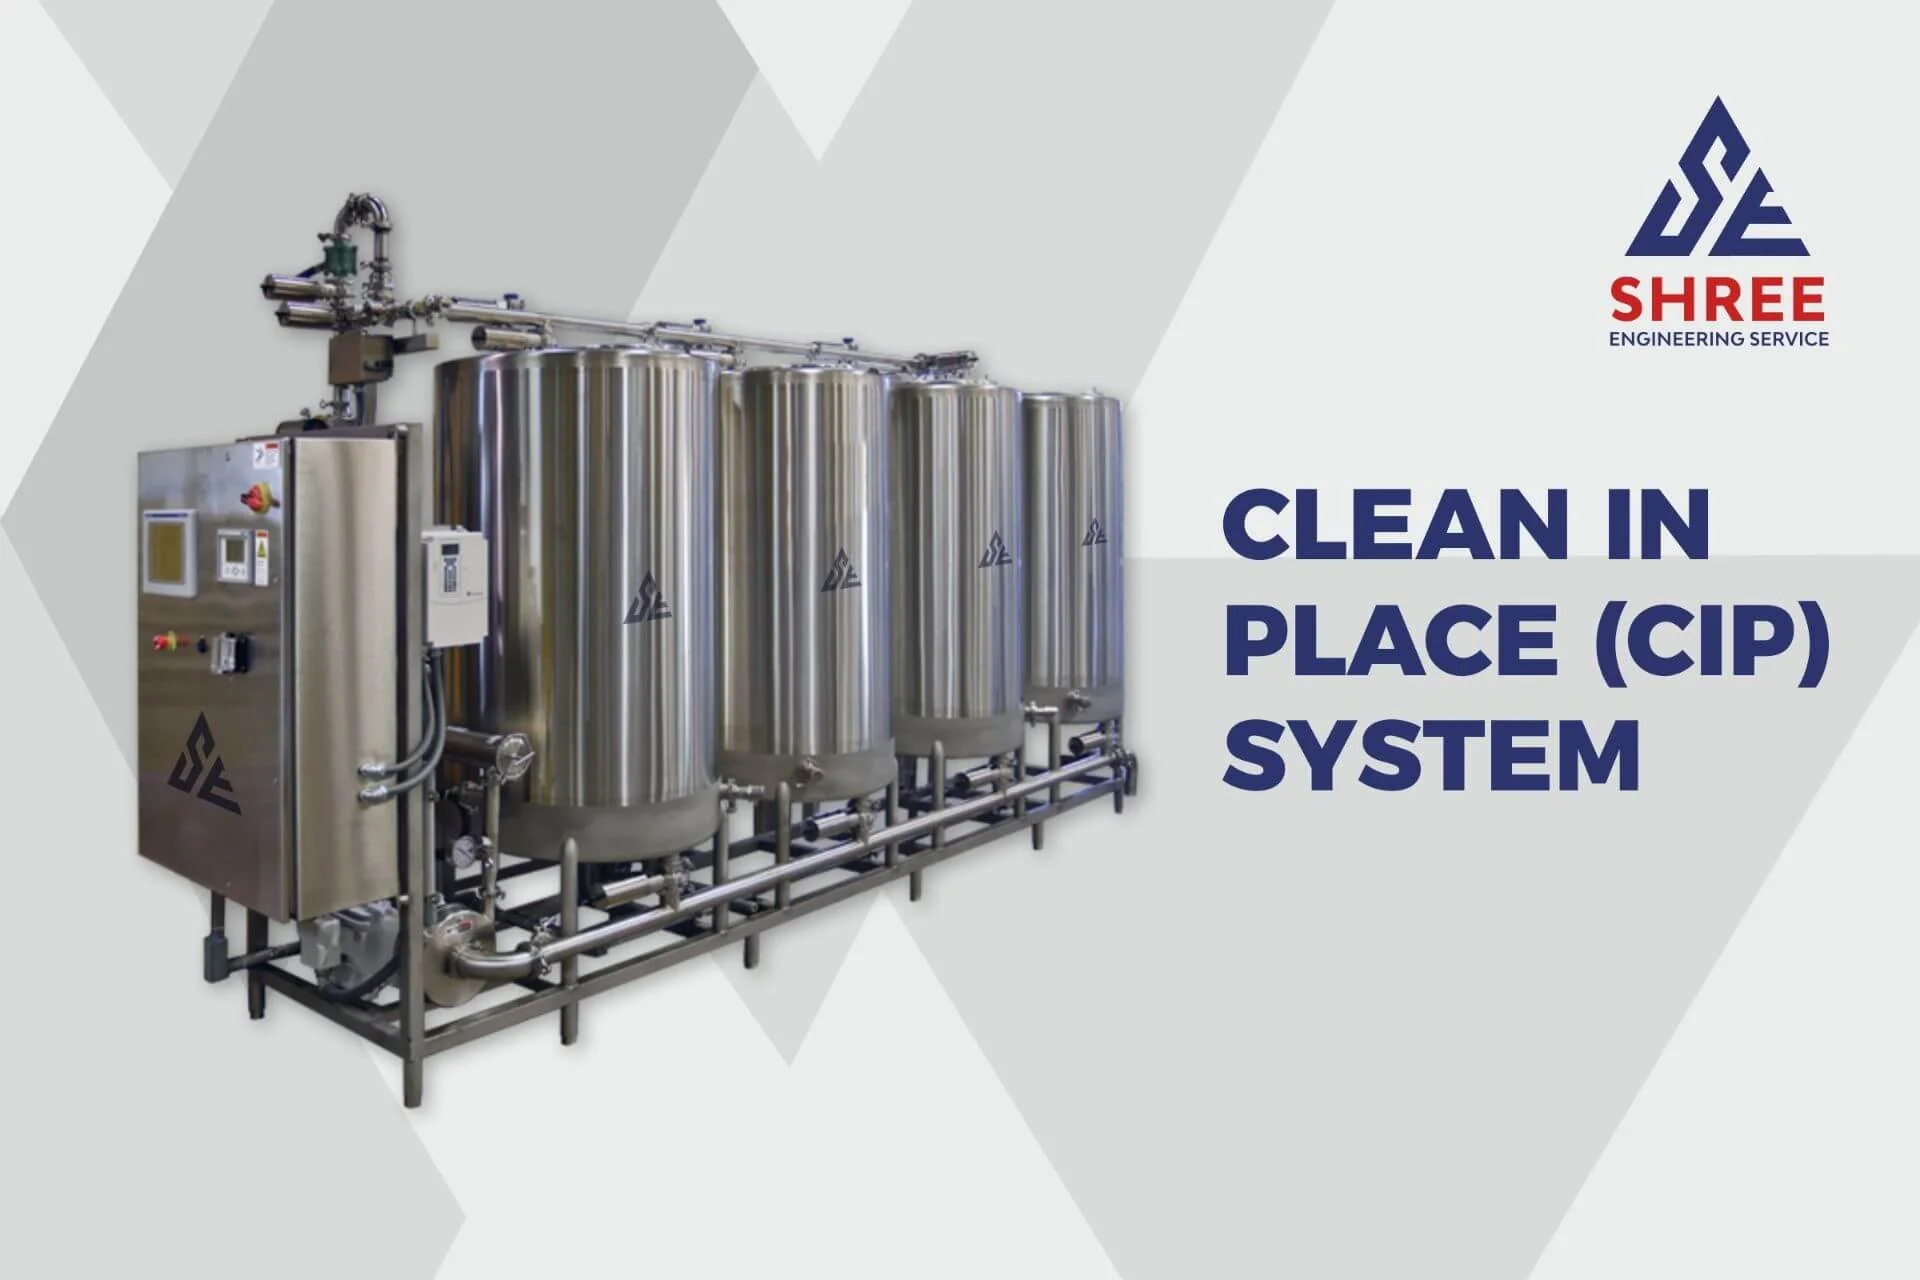 Clean in Place (CIP) System